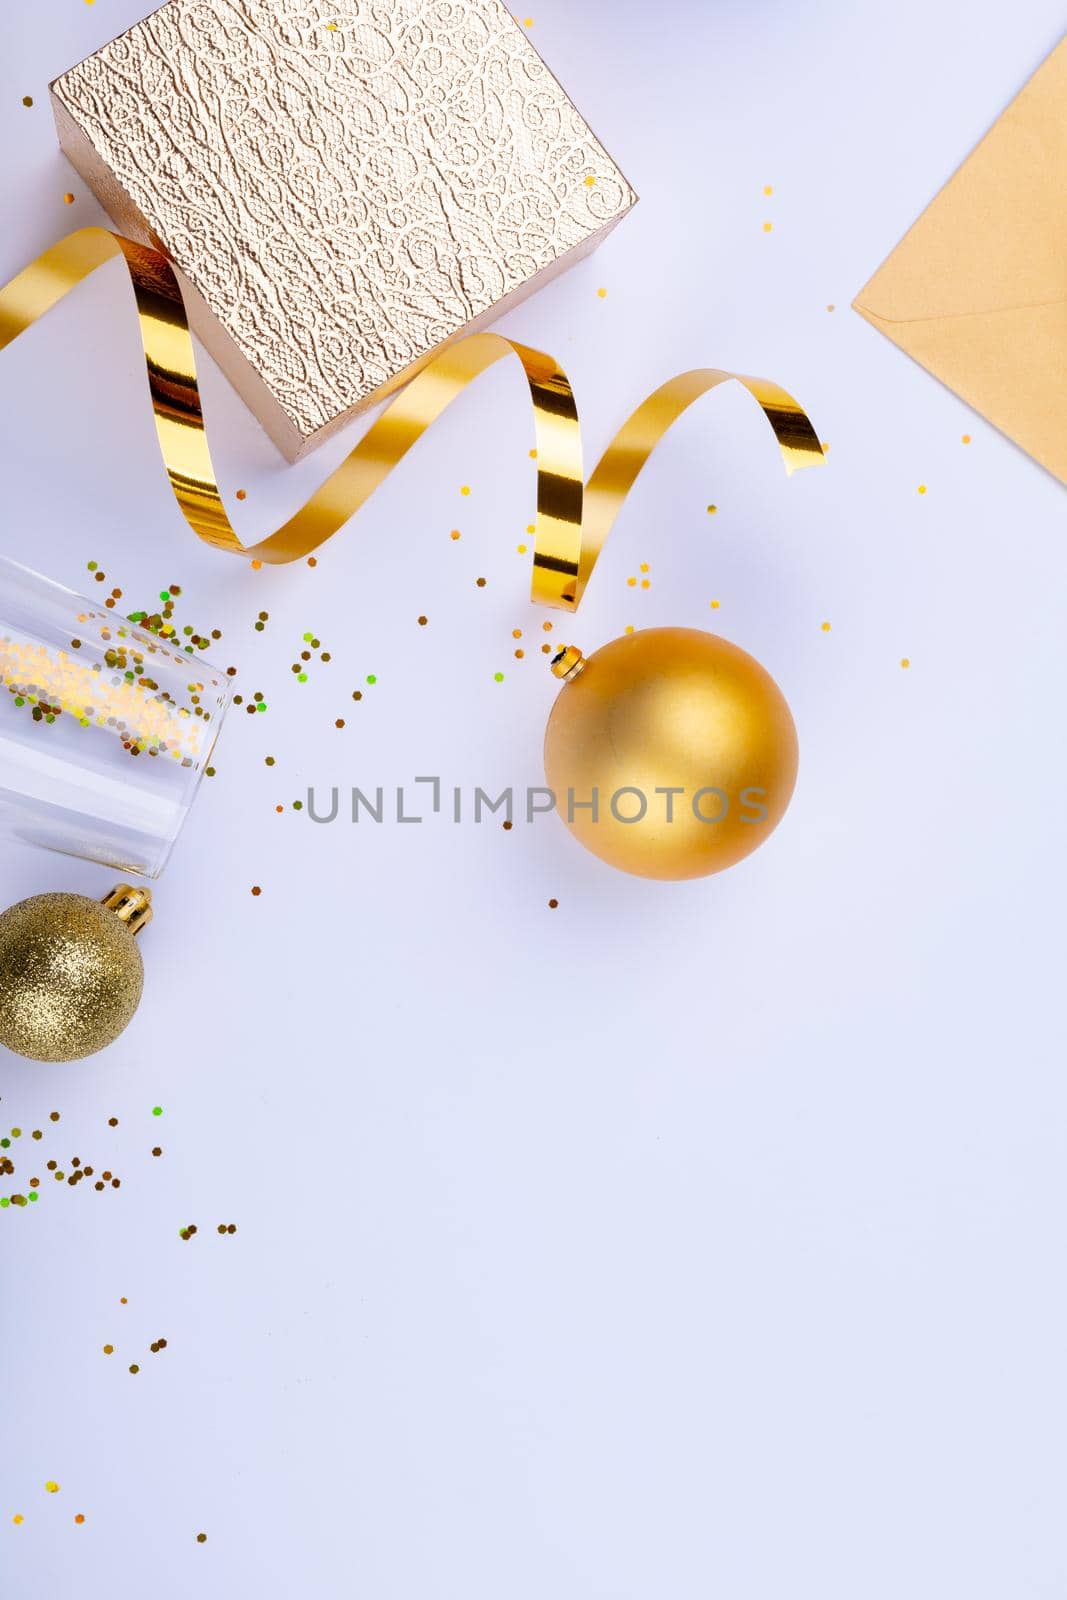 Golden ribbon and baubles by gift box and champagne flute with confetti on white background by Wavebreakmedia